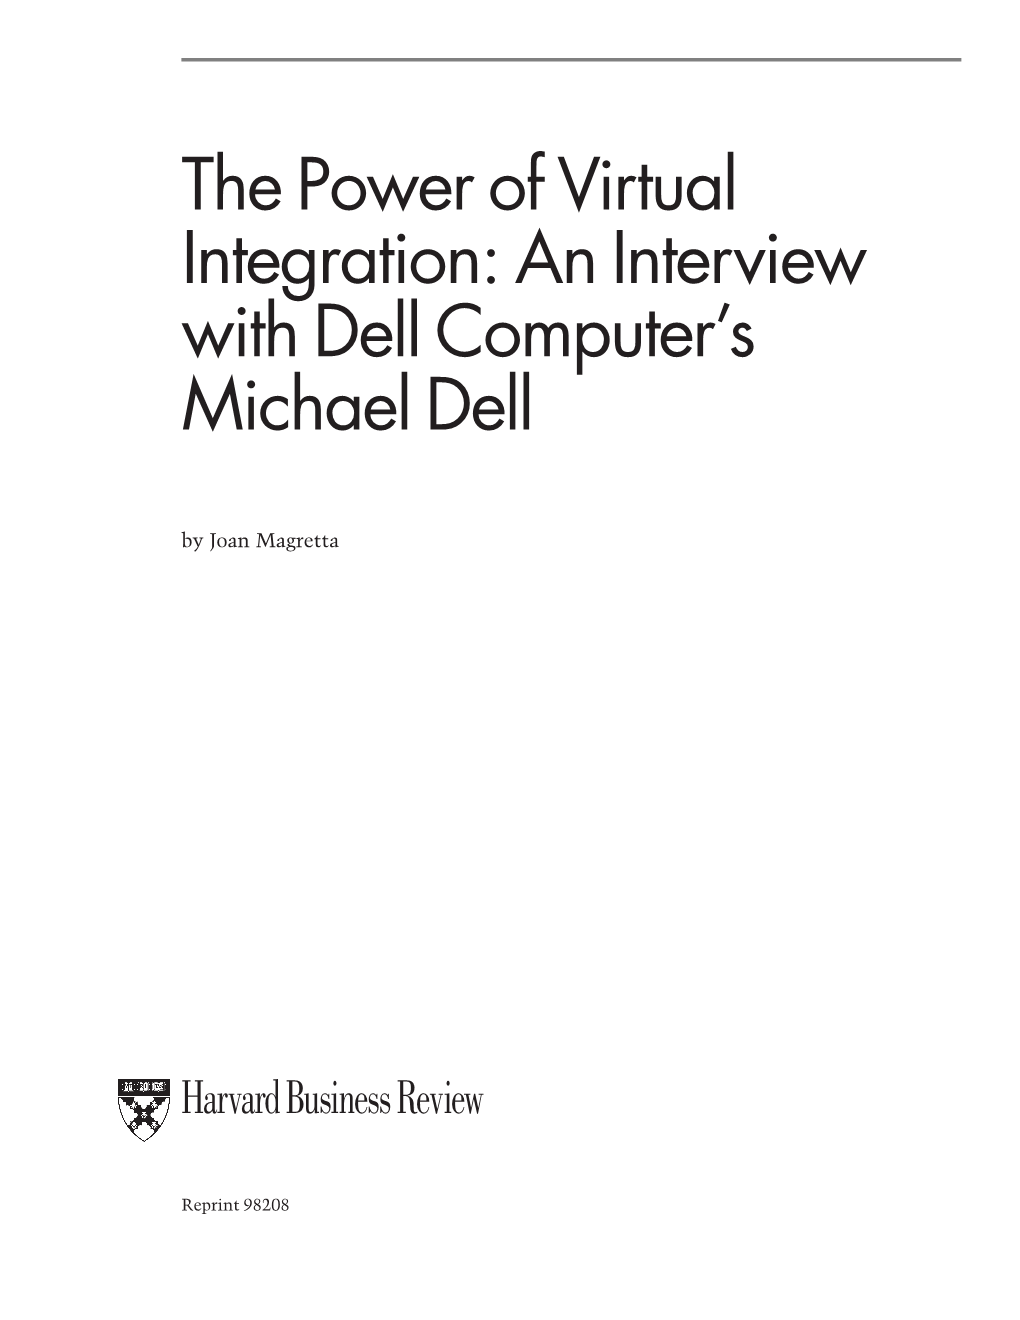 The Power of Virtual Integration: an Interview with Dell Computer's